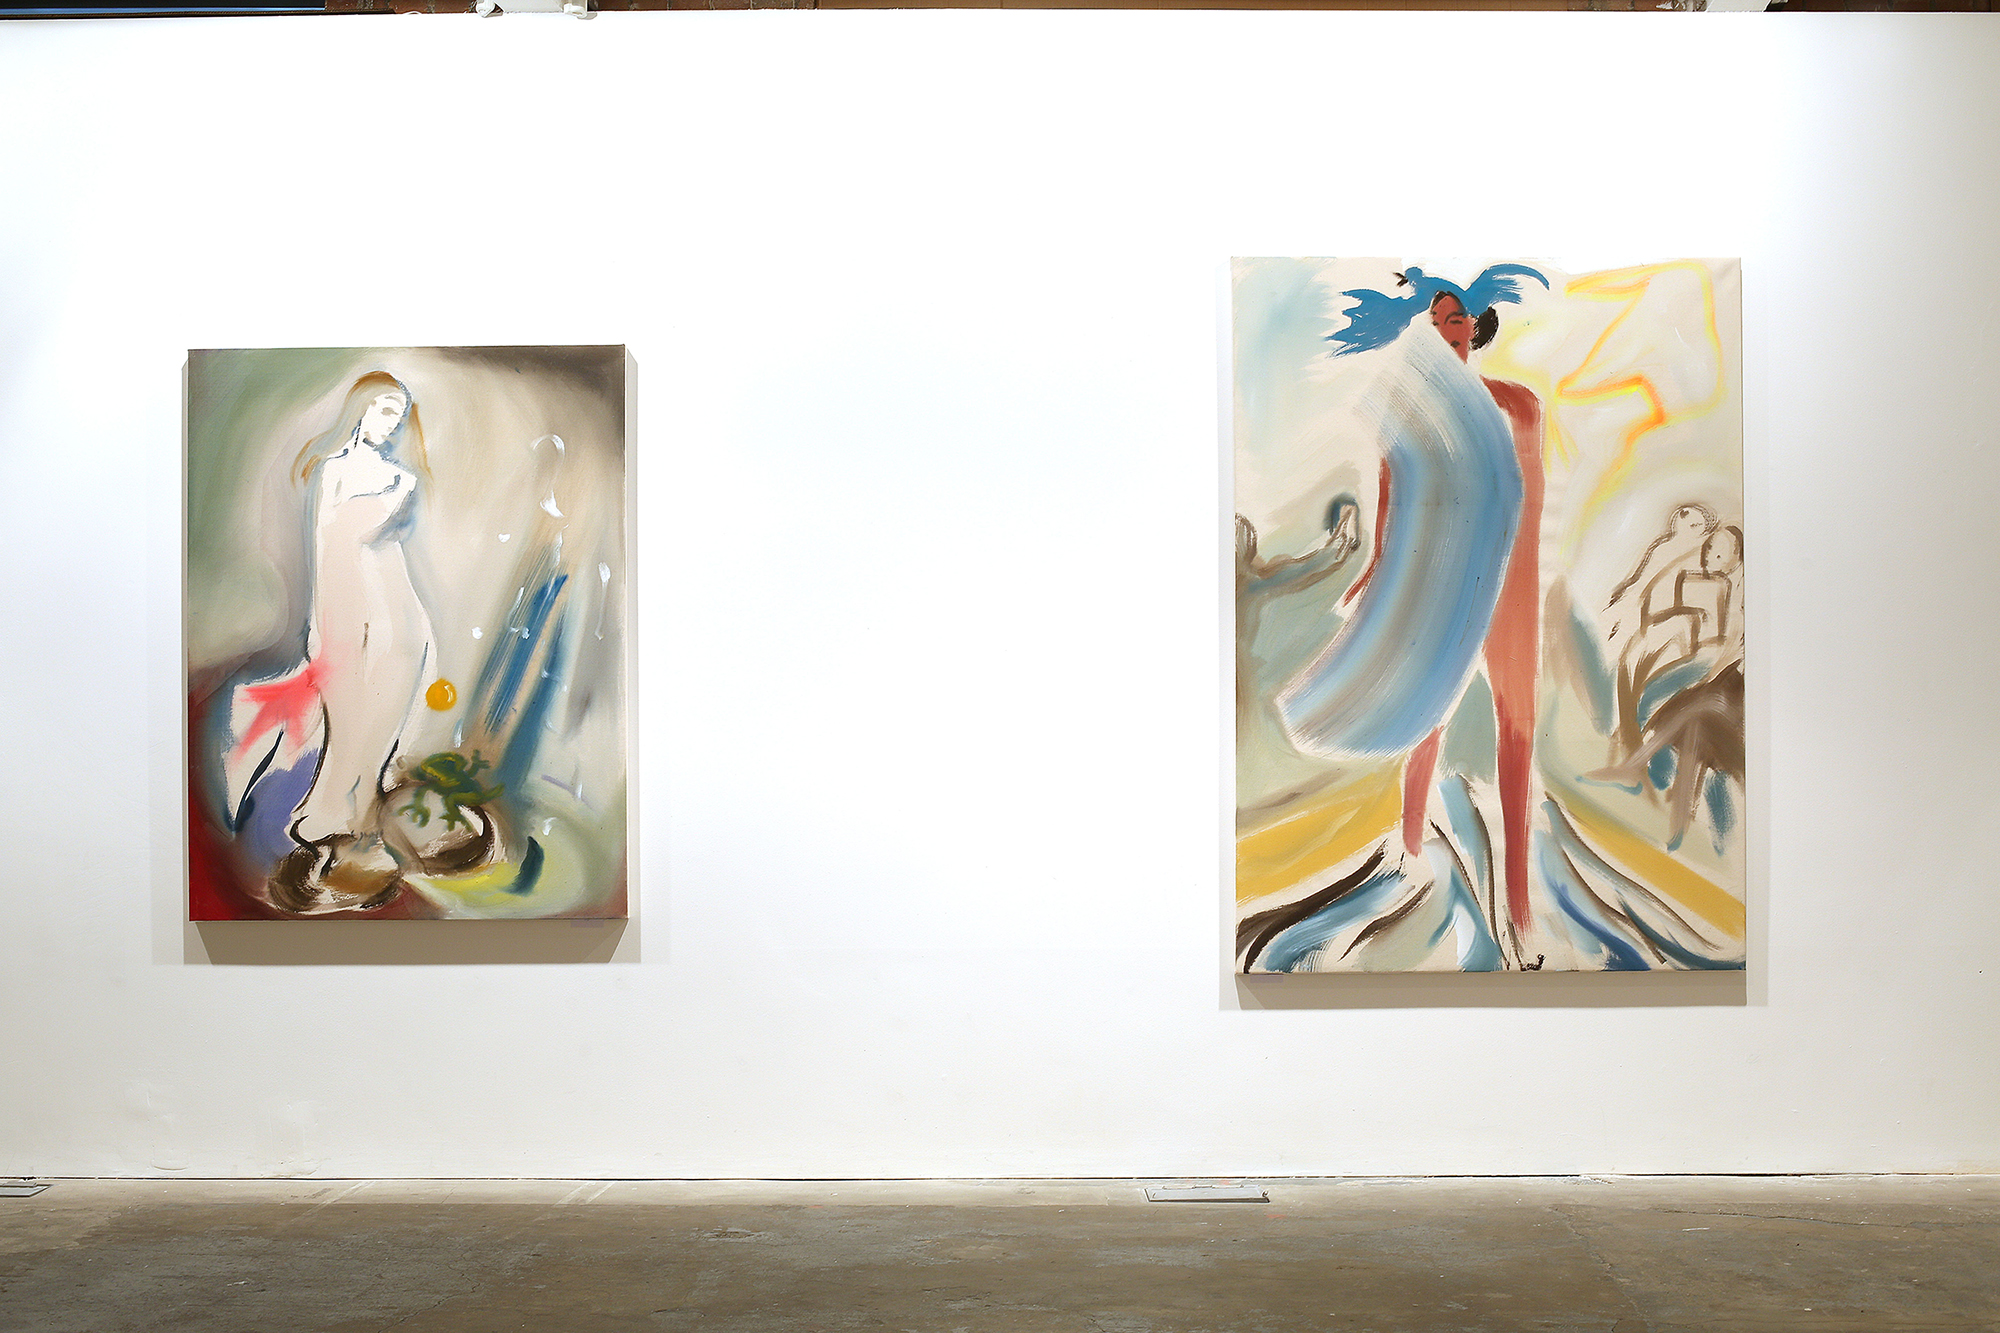 Installation view. After a Fashion – A Play with Fire
, Sophie von Hellermann